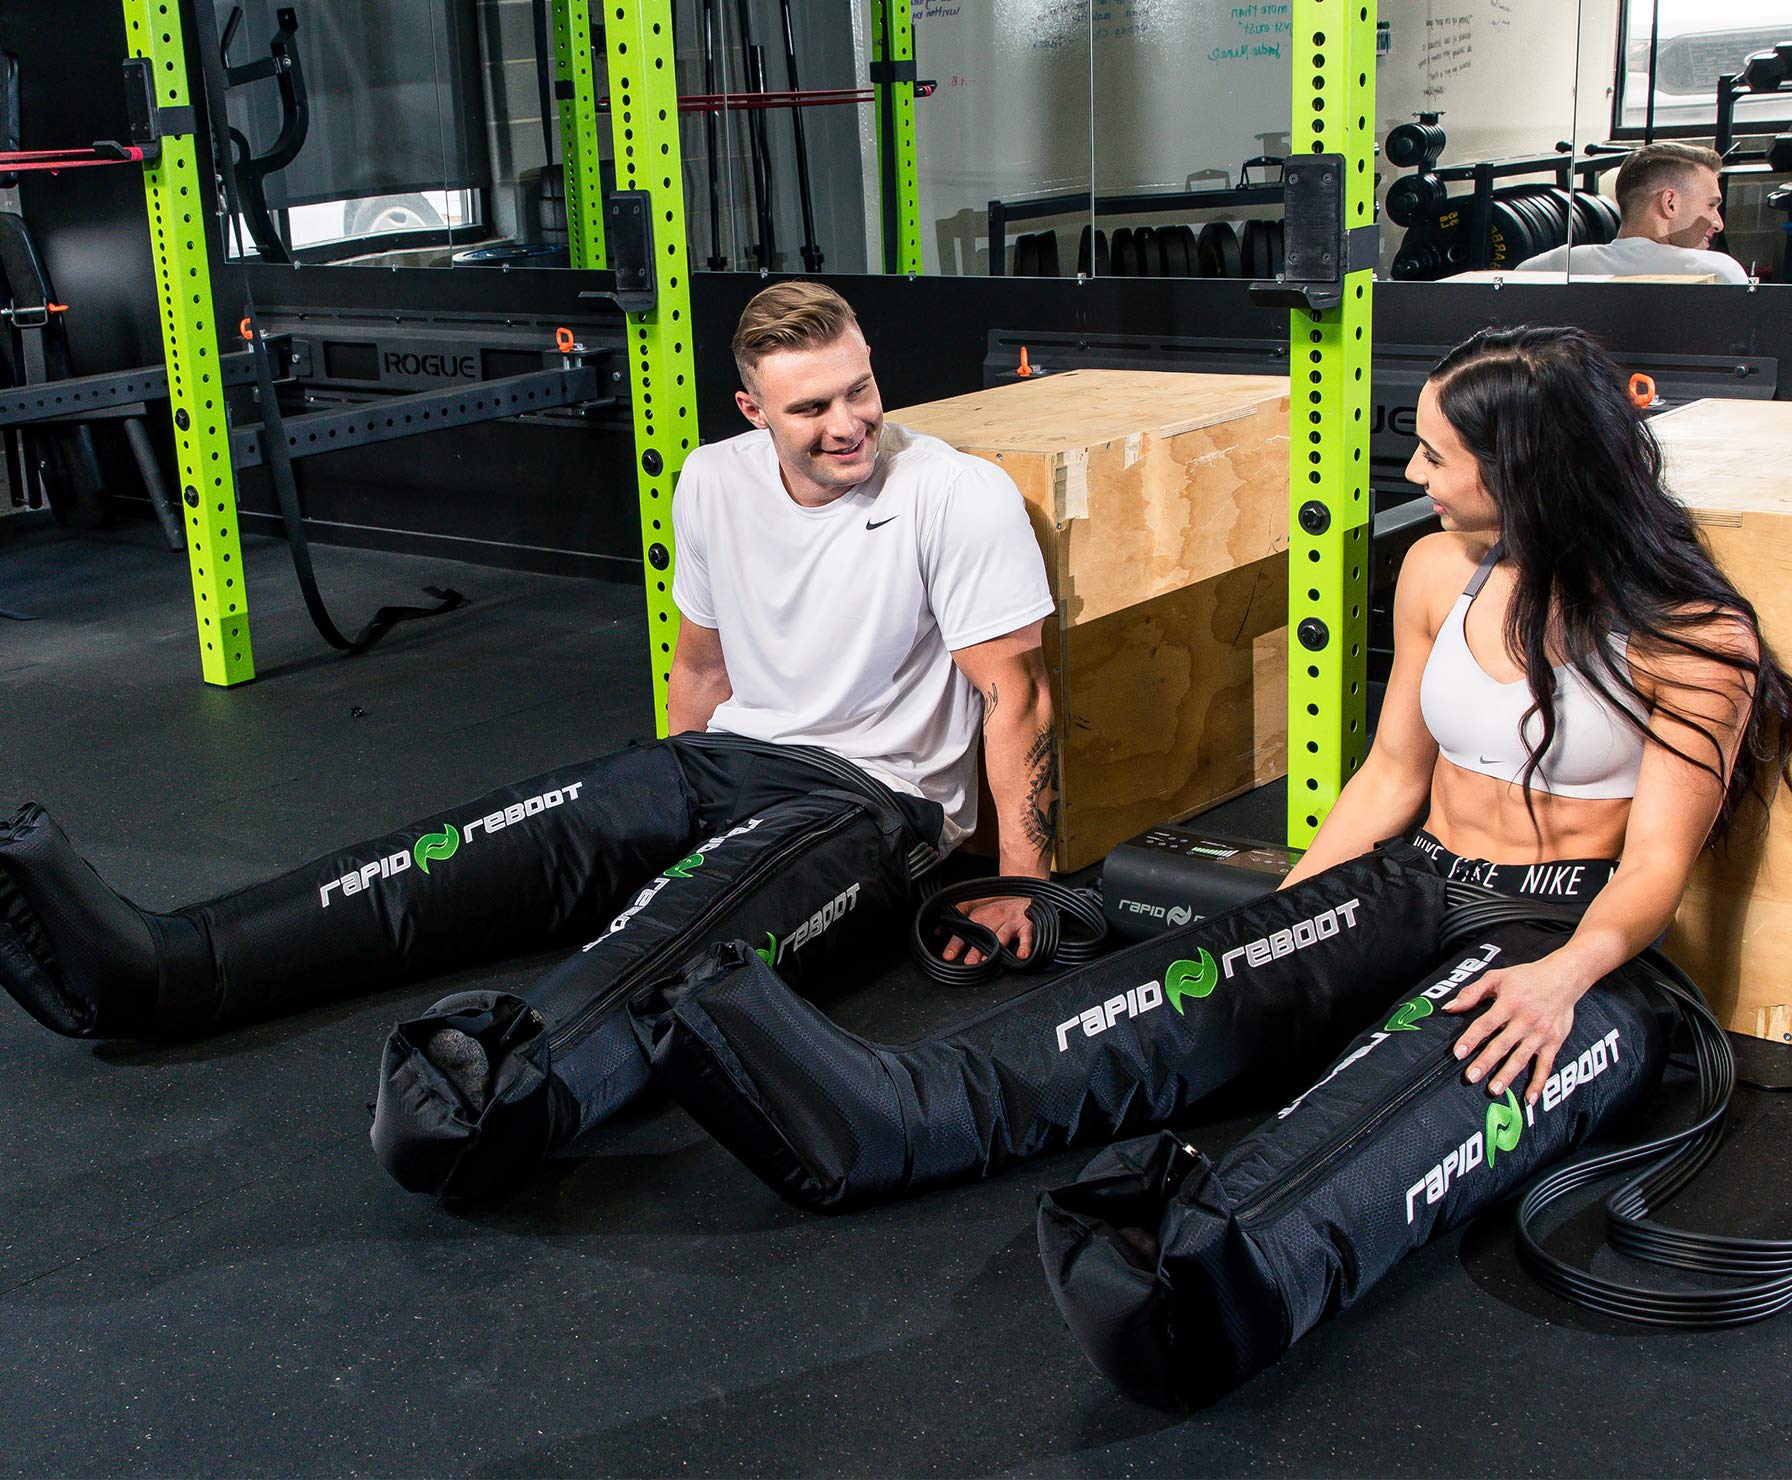 Rapid Reboot Complete Package: Compression Boot, Arm, Hip, Pump, & Duffel. Sequential air Compression Therapy for Improved Circulation and Workout Recovery for Athletes